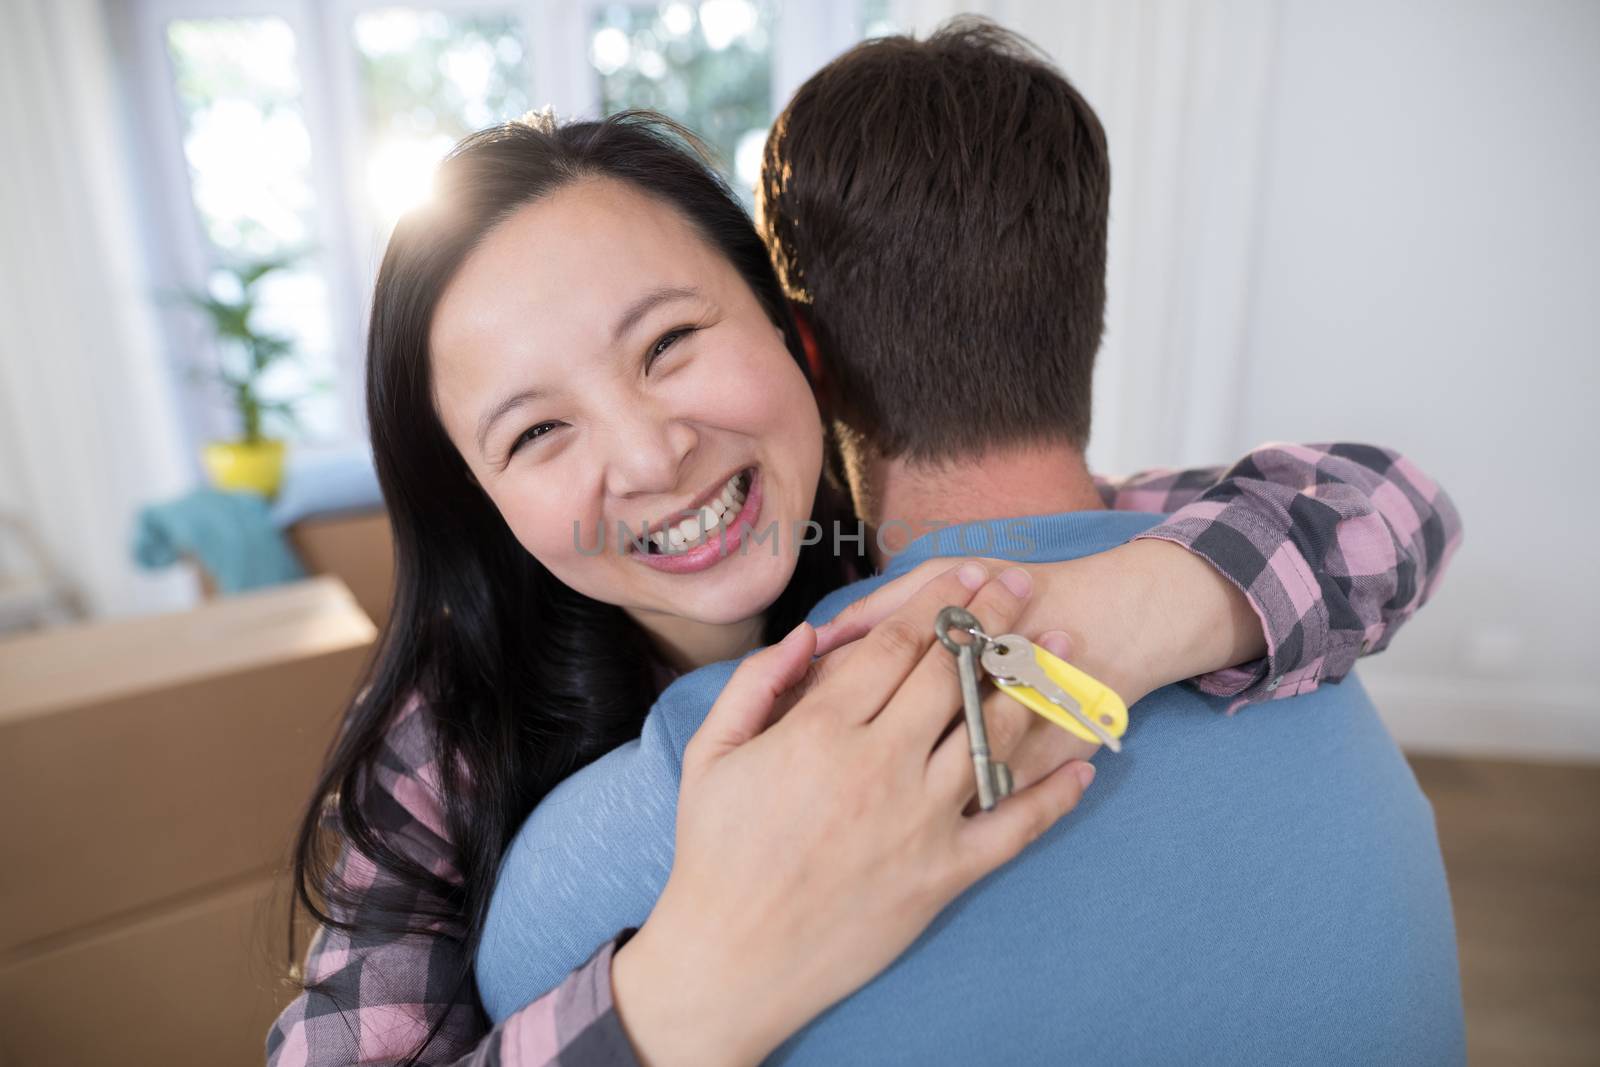 Couple embracing each other while holding keys of new home by Wavebreakmedia